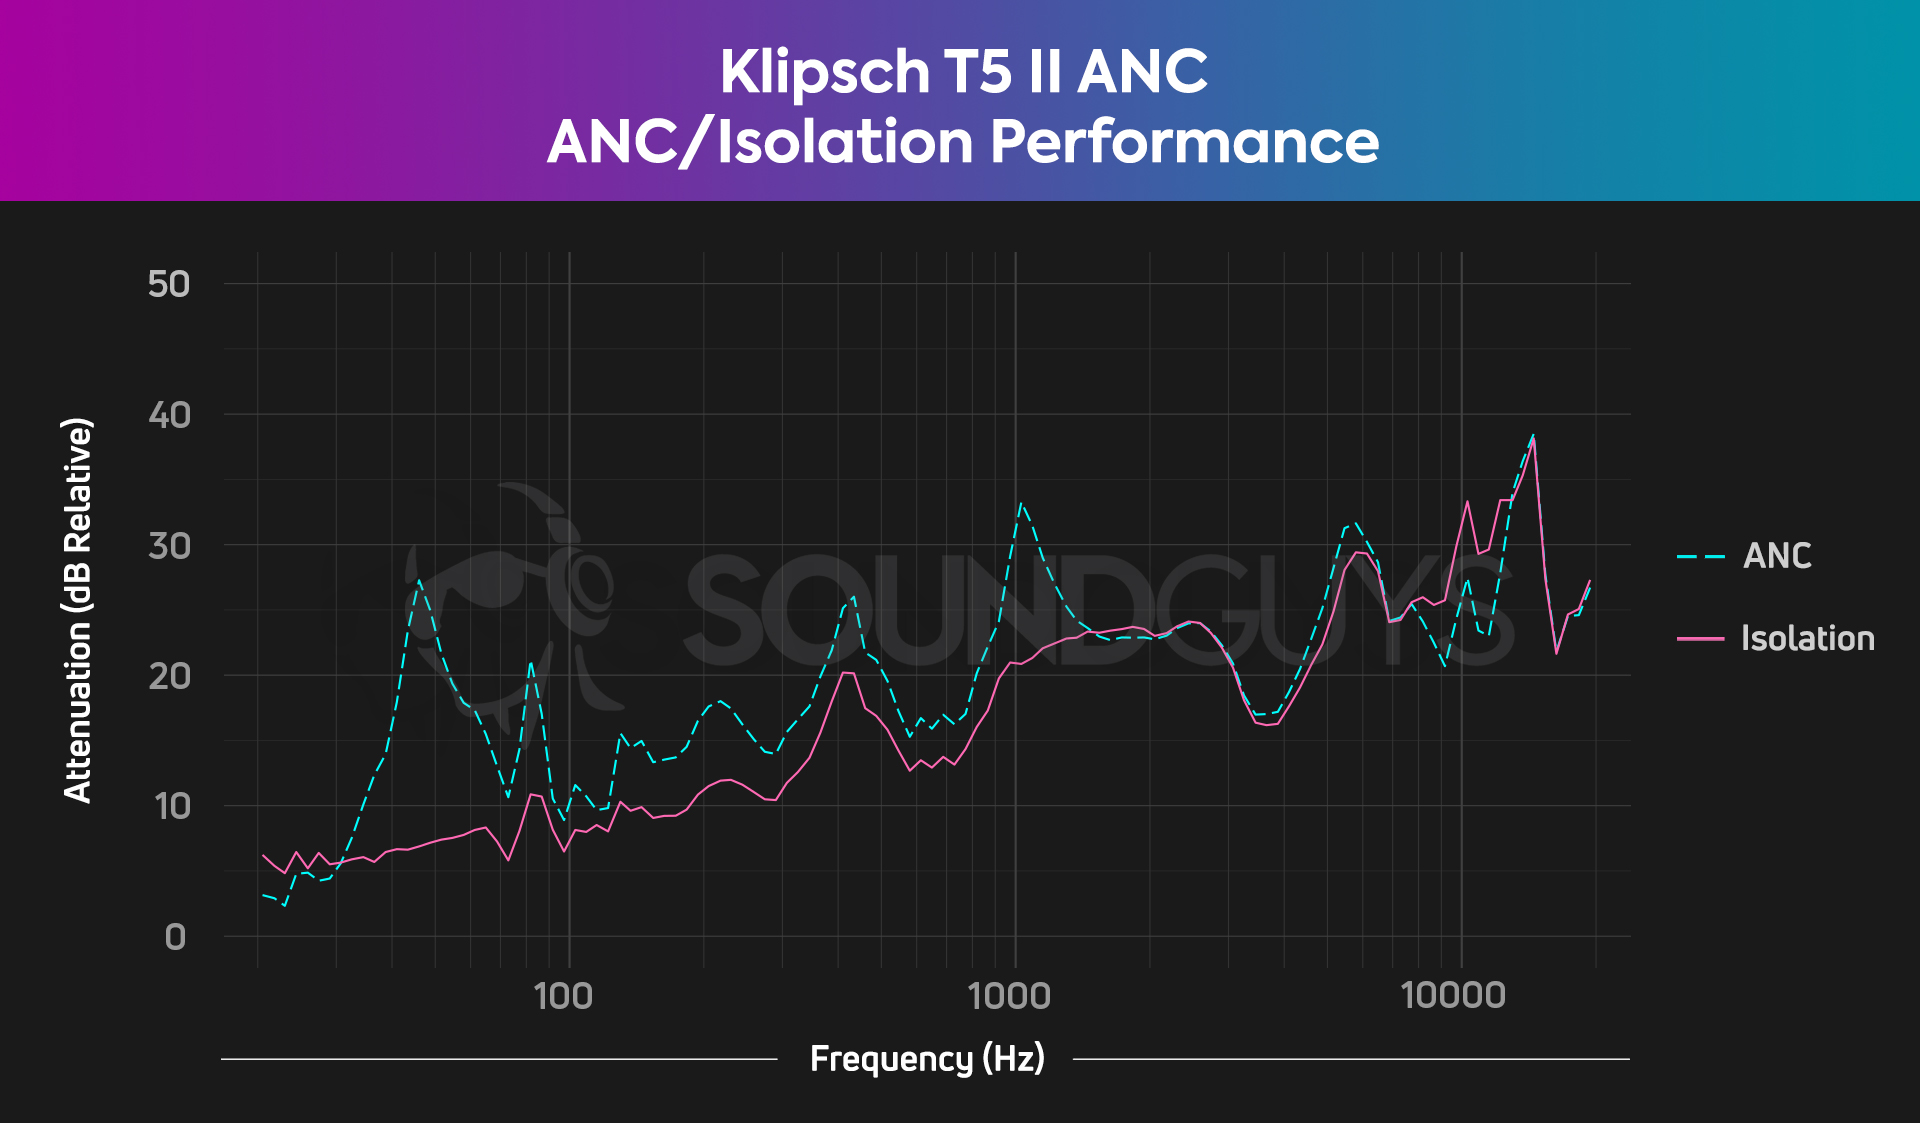 ANC and isolation measurements chart shown for Klipsch T5 II ANC.